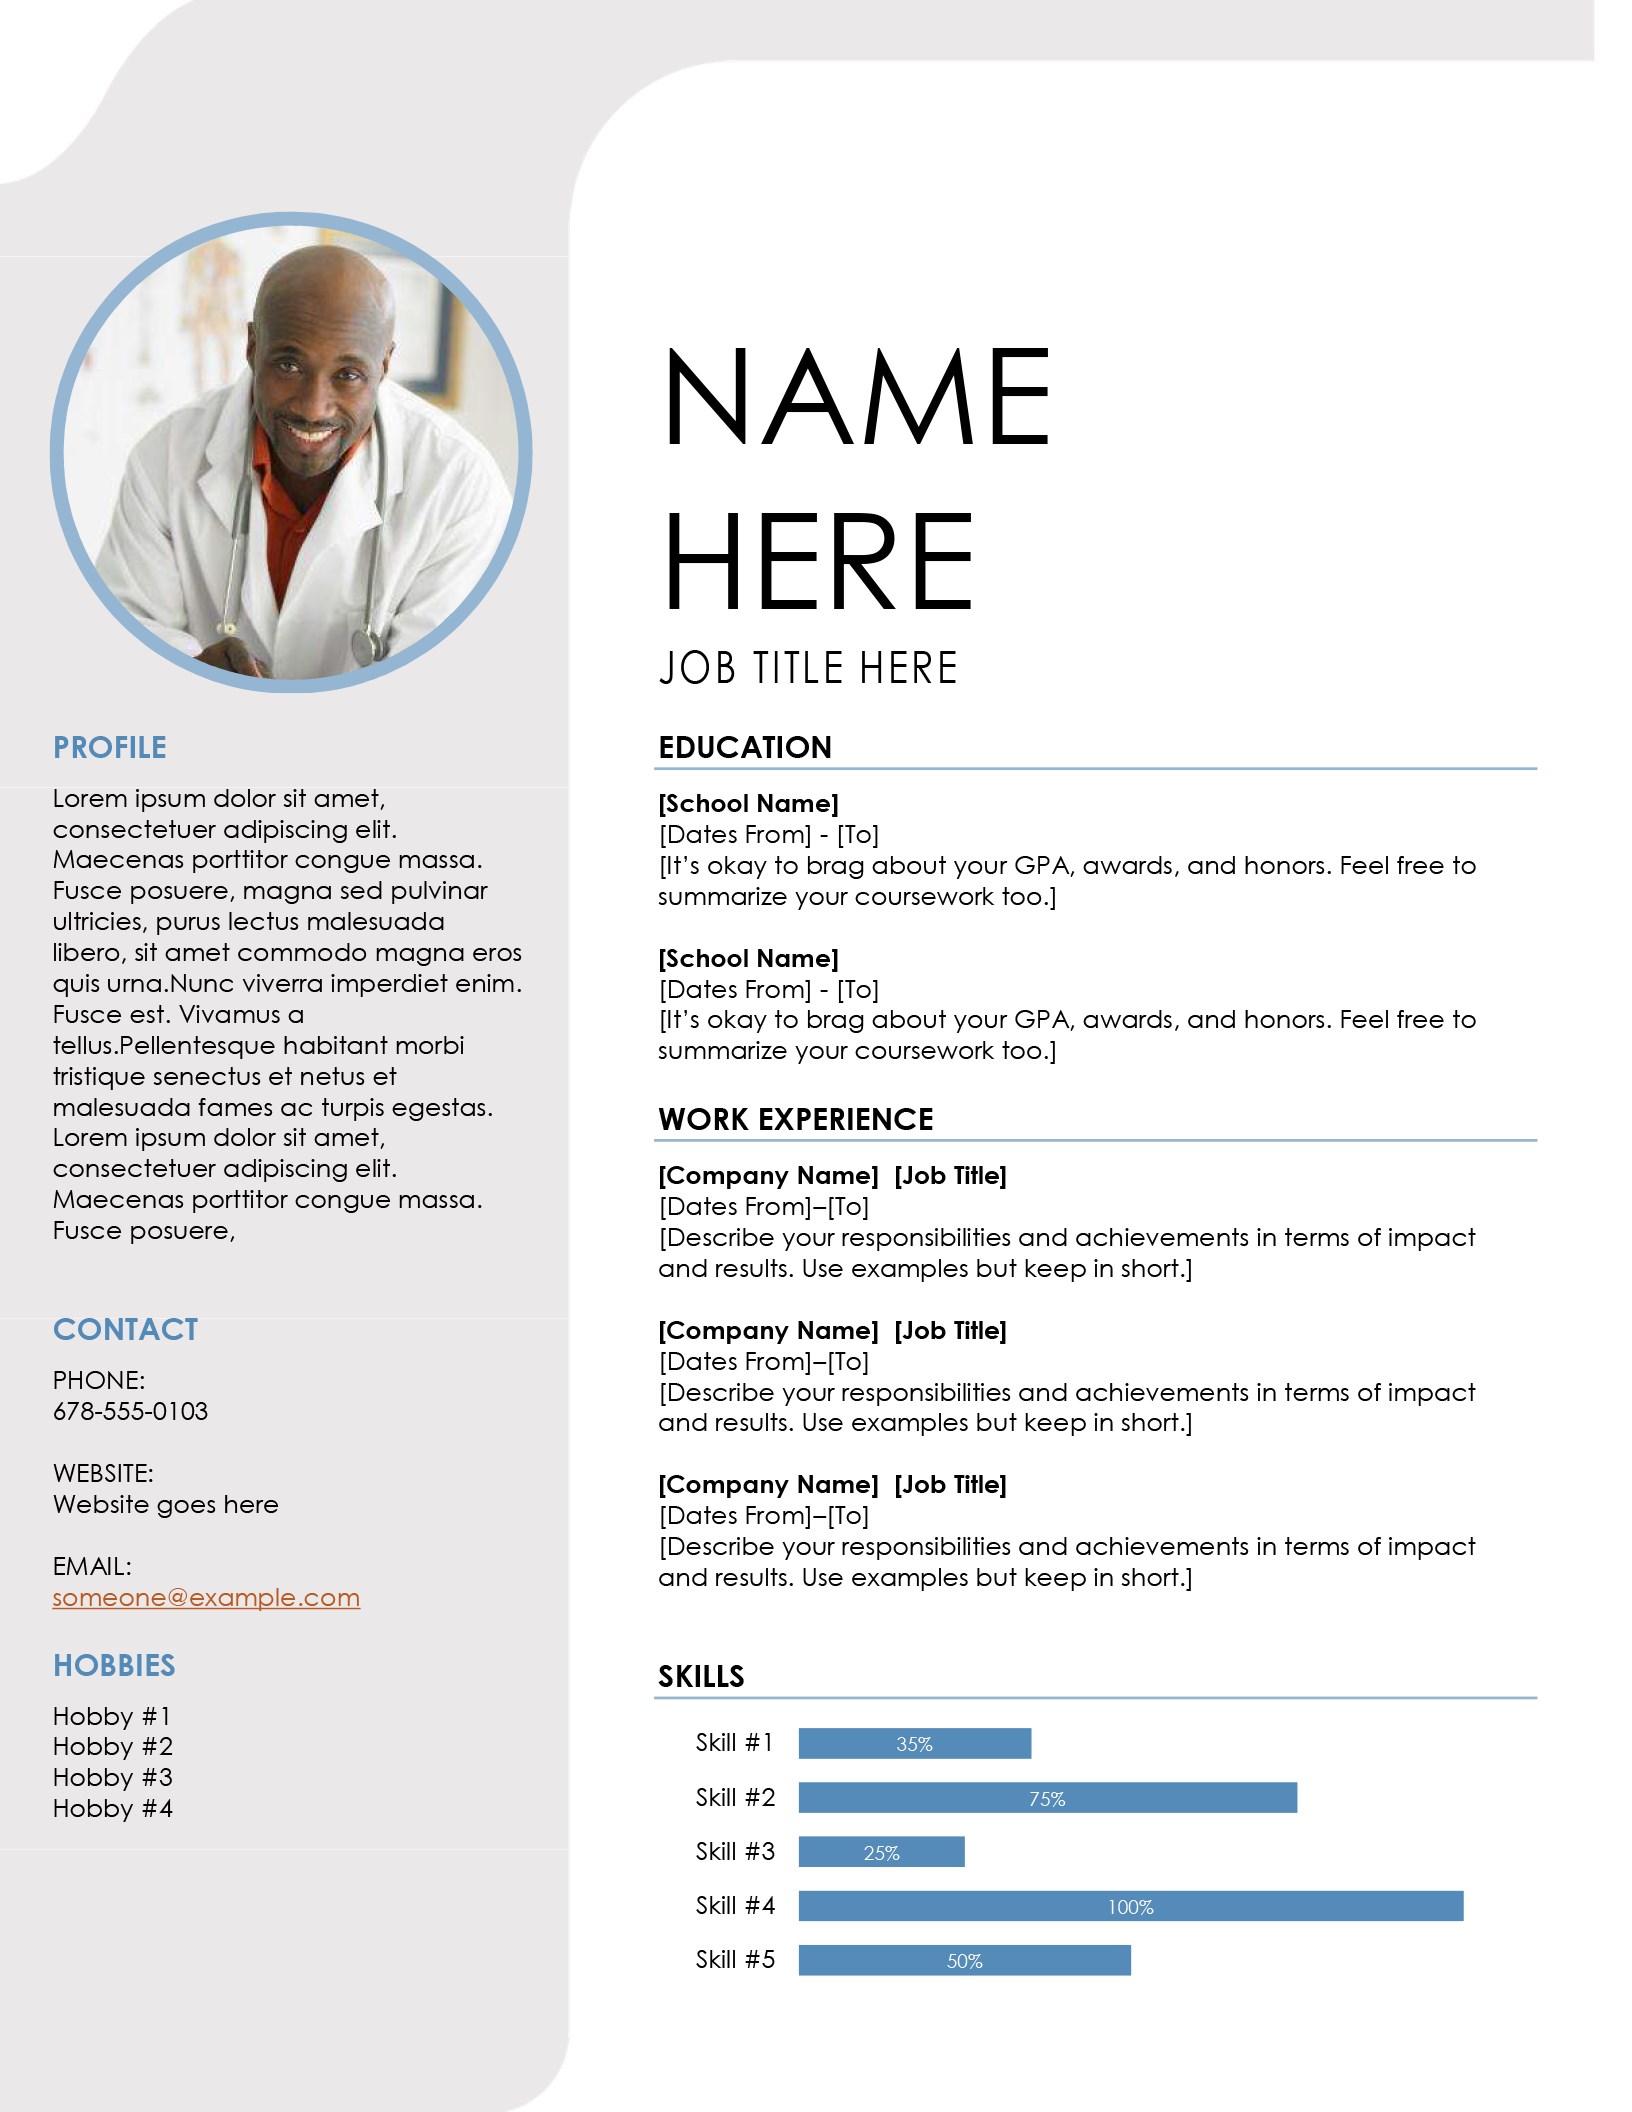 Free Resume Templates For Word Resumes And Cover Letters Office Com Job Resume Template Microsoft Word Templates free resume templates for word|wikiresume.com